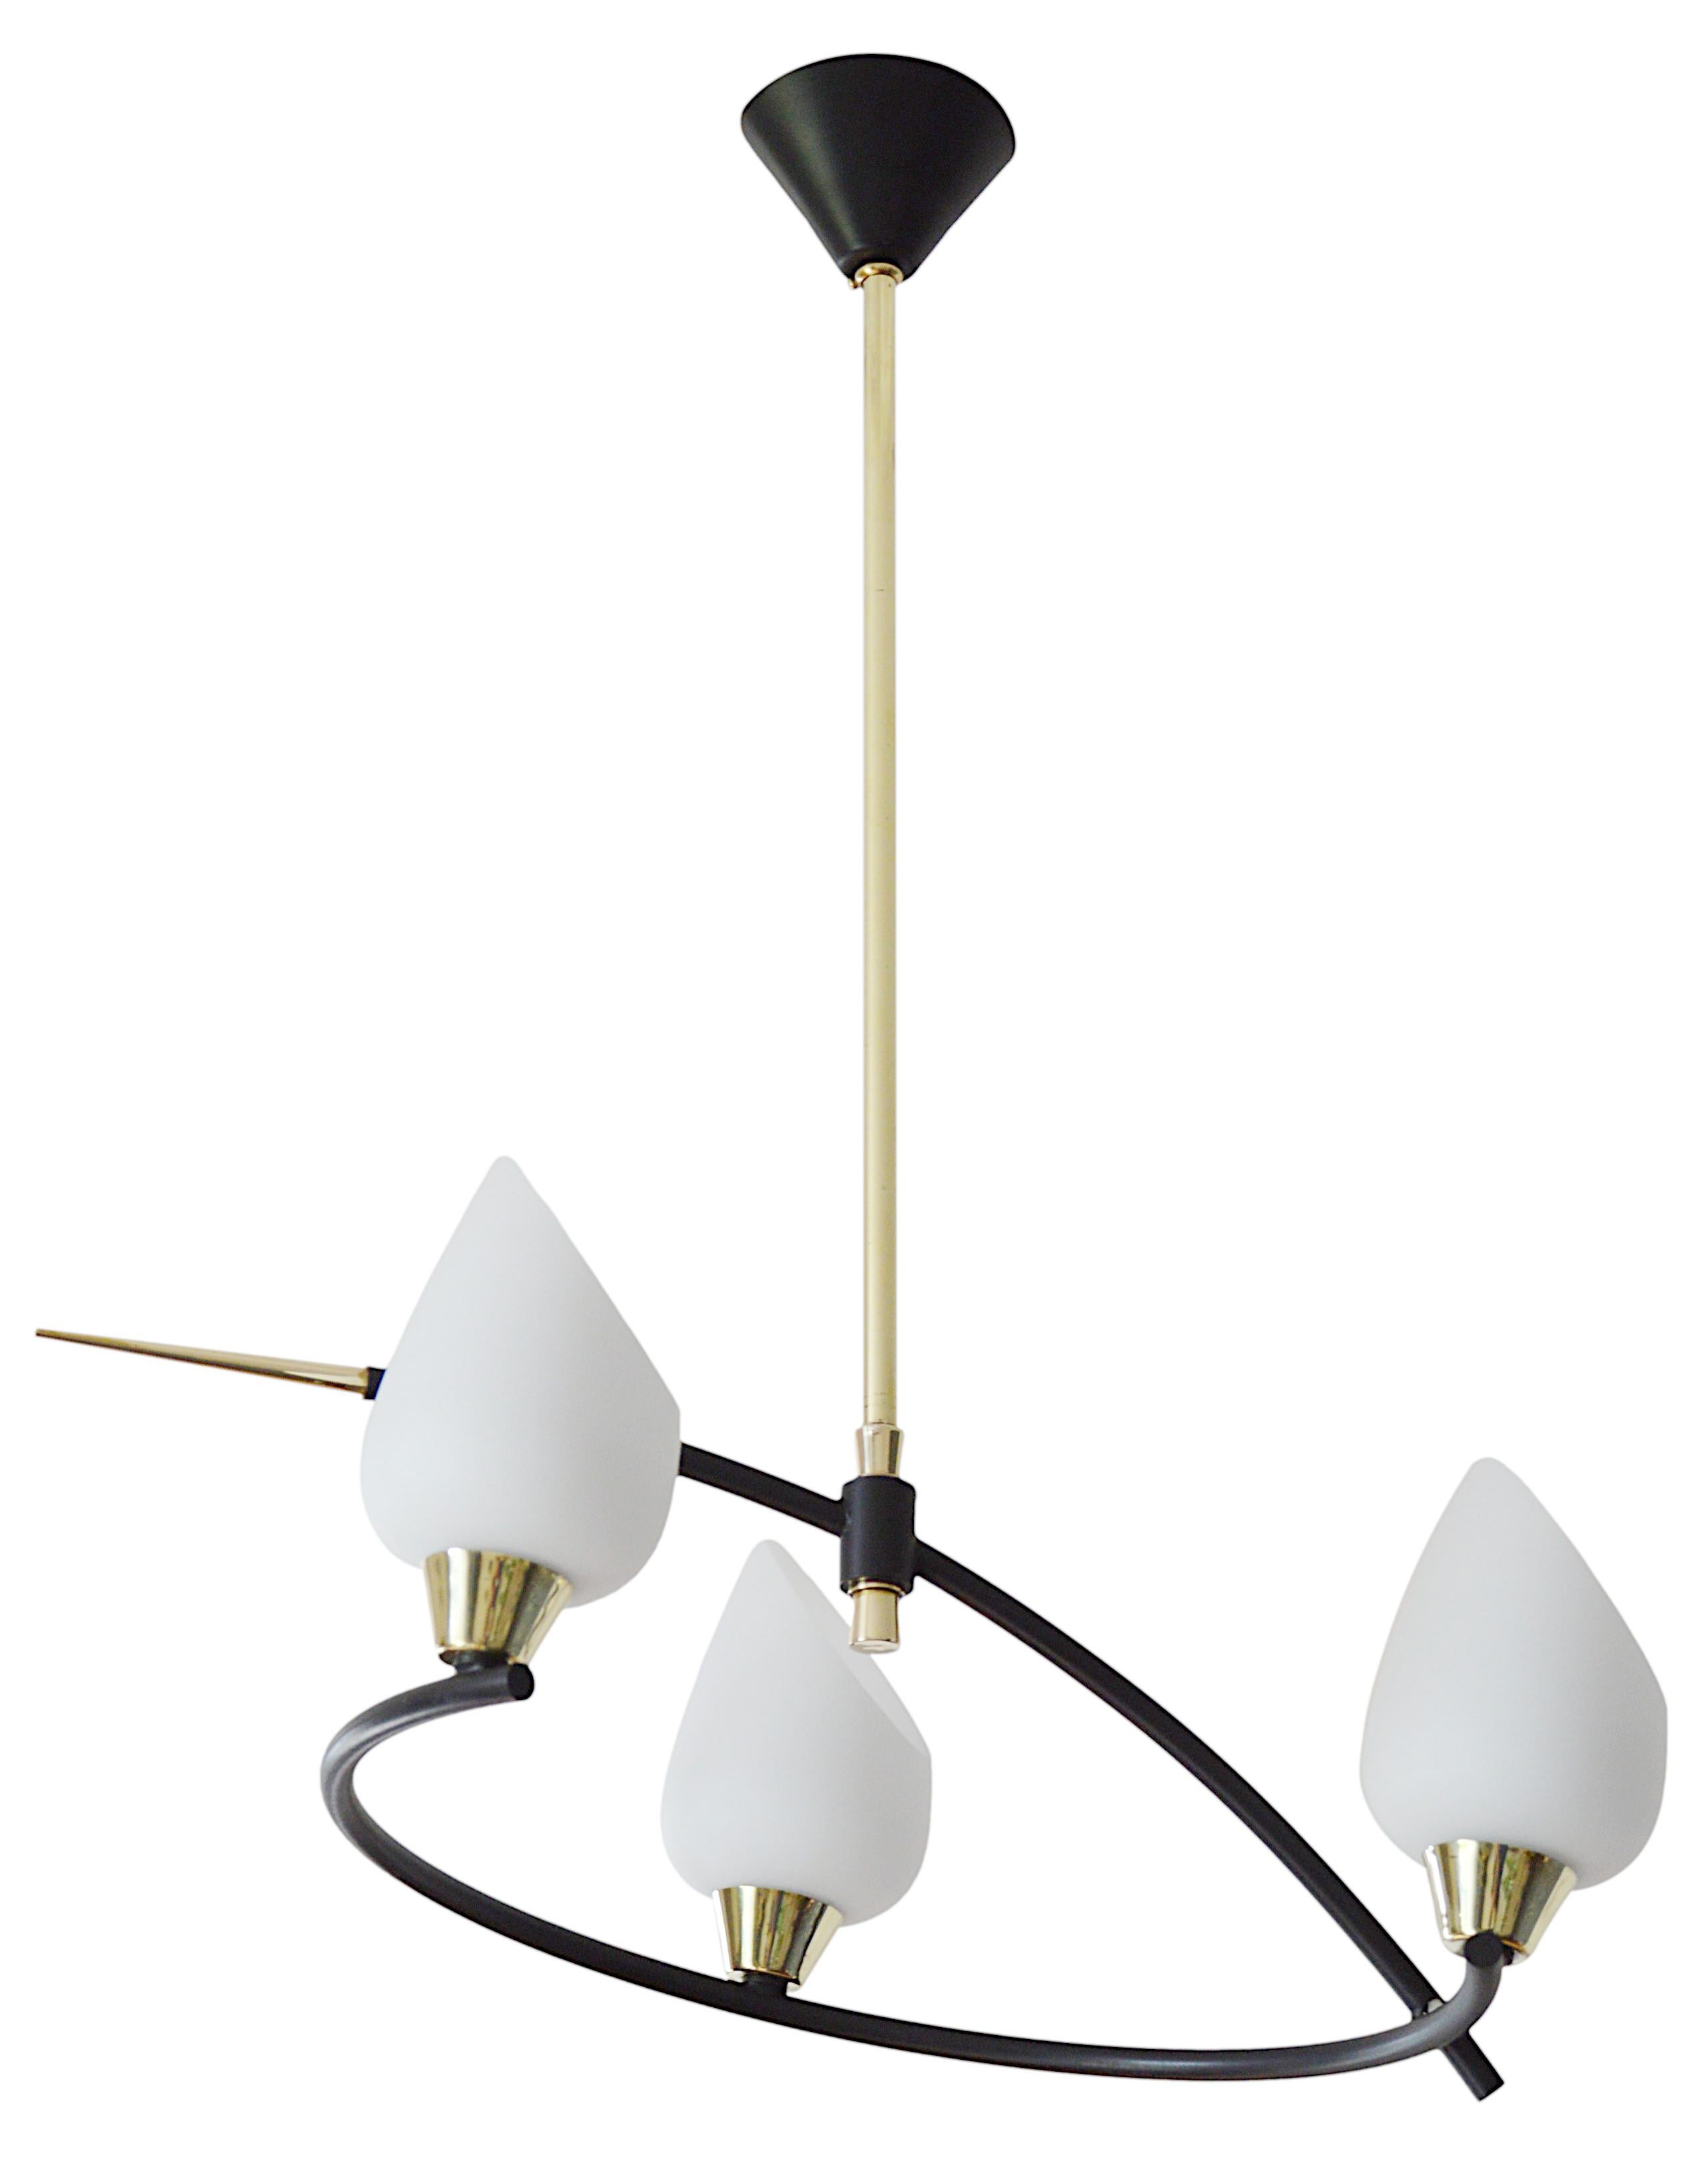 French Mid-century chandelier by Arlus (Paris), France, 1950s. 3 lights. Original shades on their metal and brass fixture. Height: 24.4